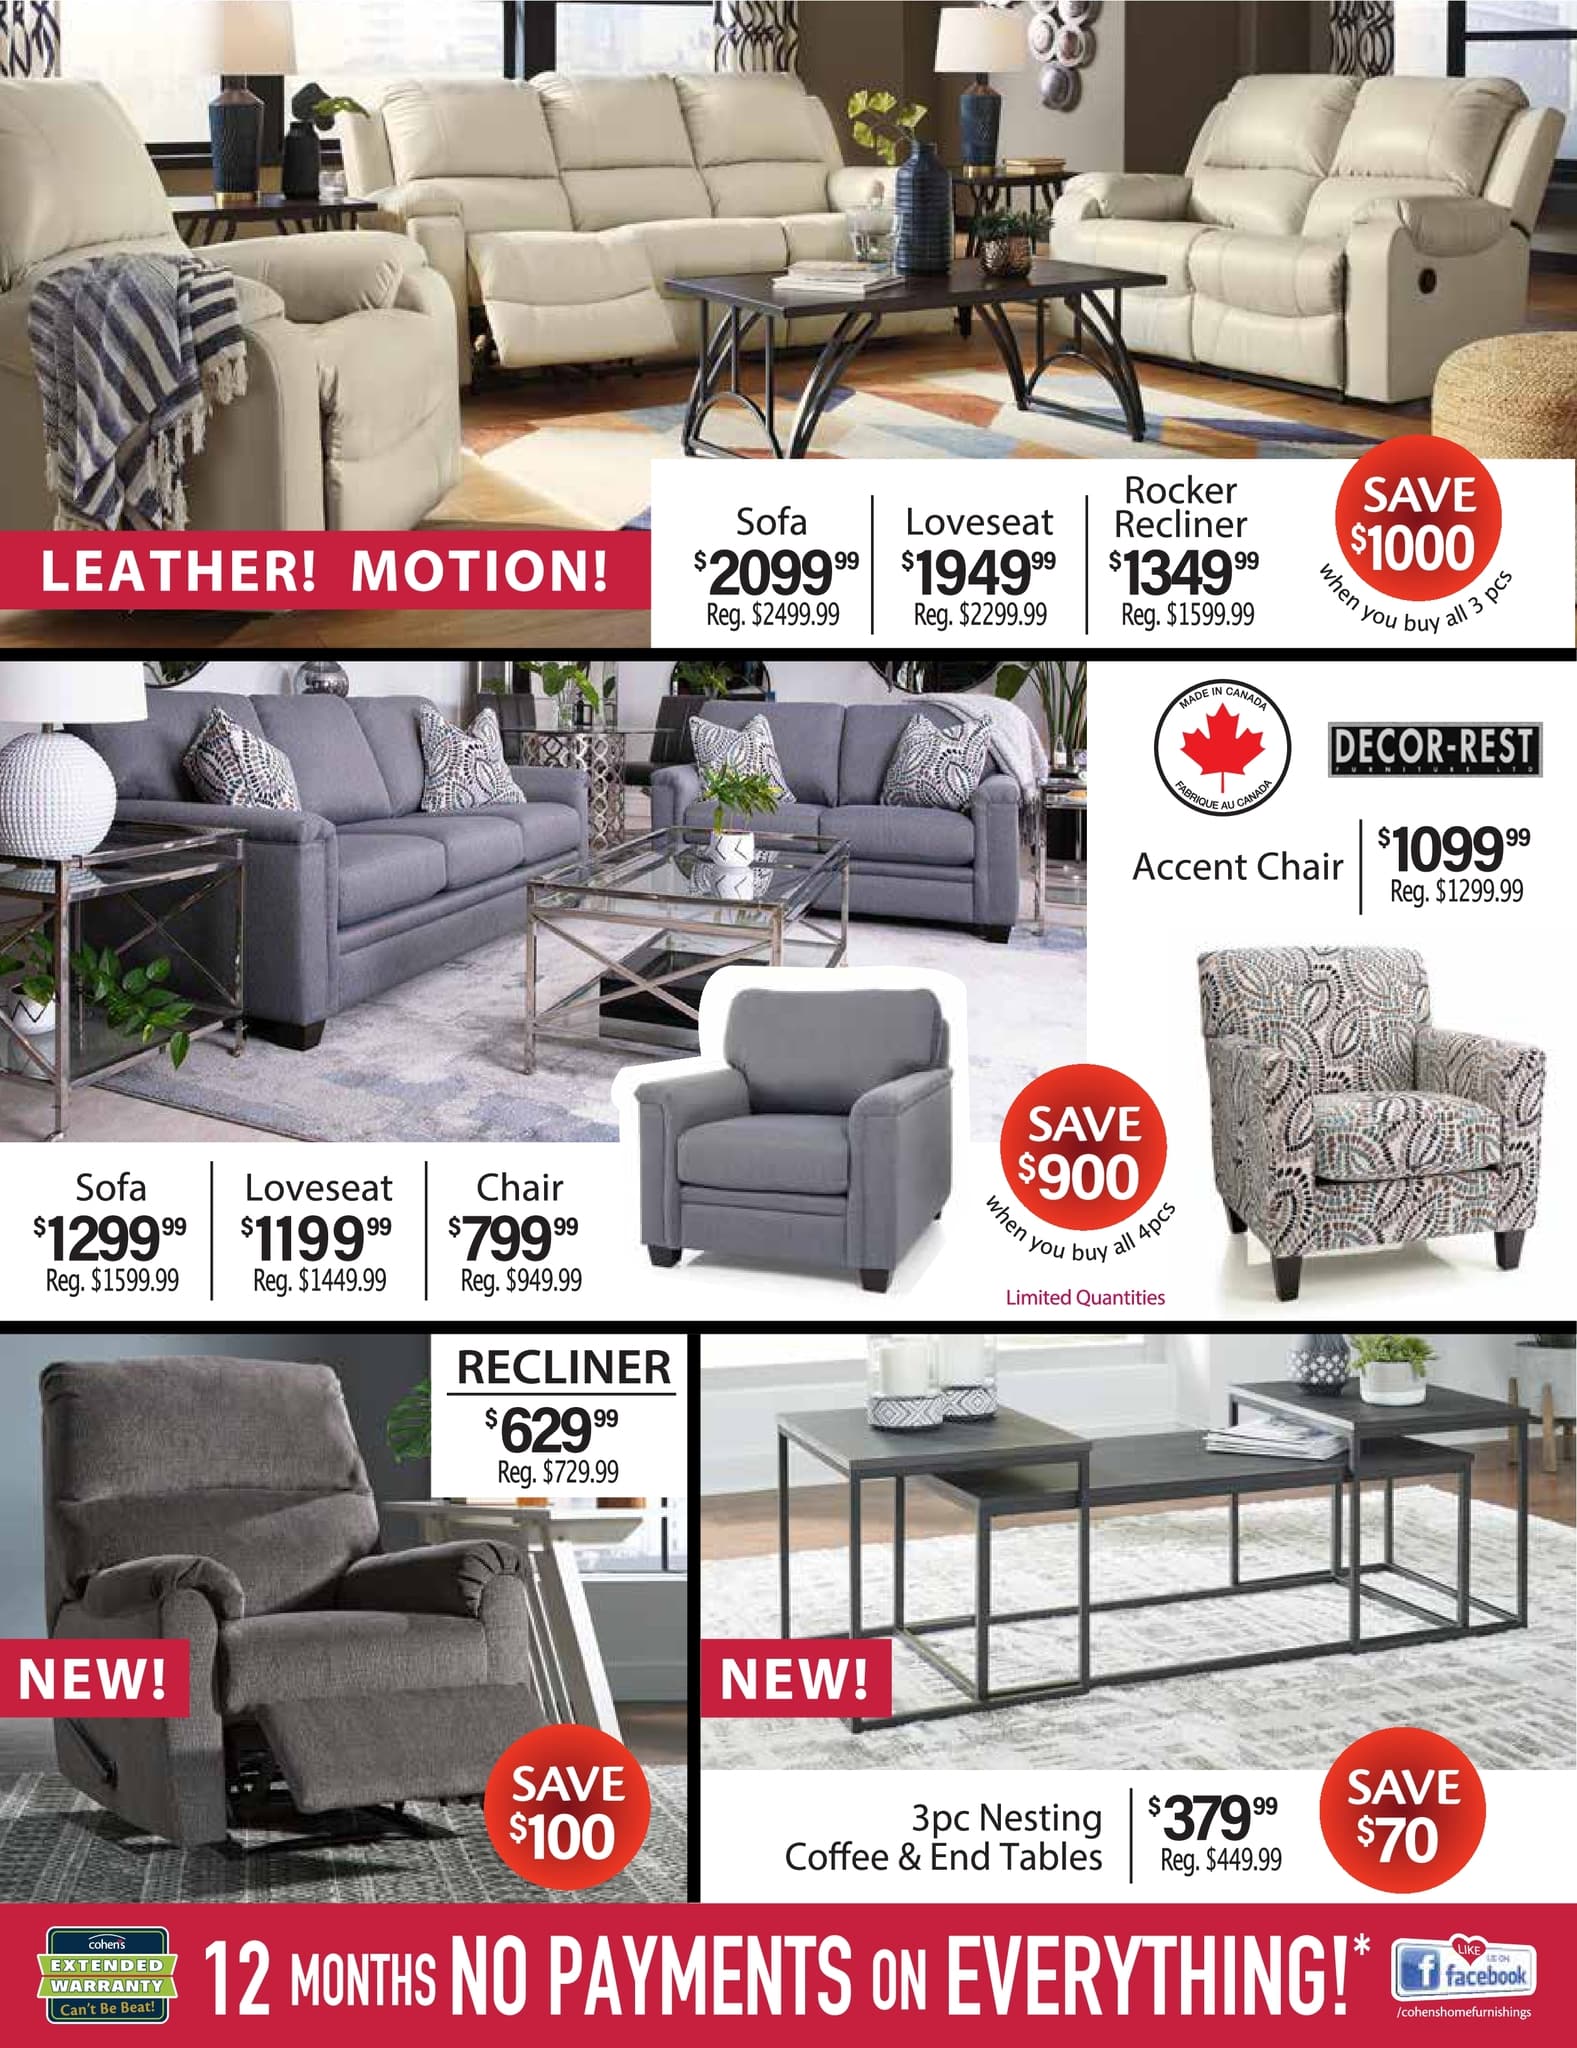 Cohen's Home Furnishings - Monthly Savings - Page 3